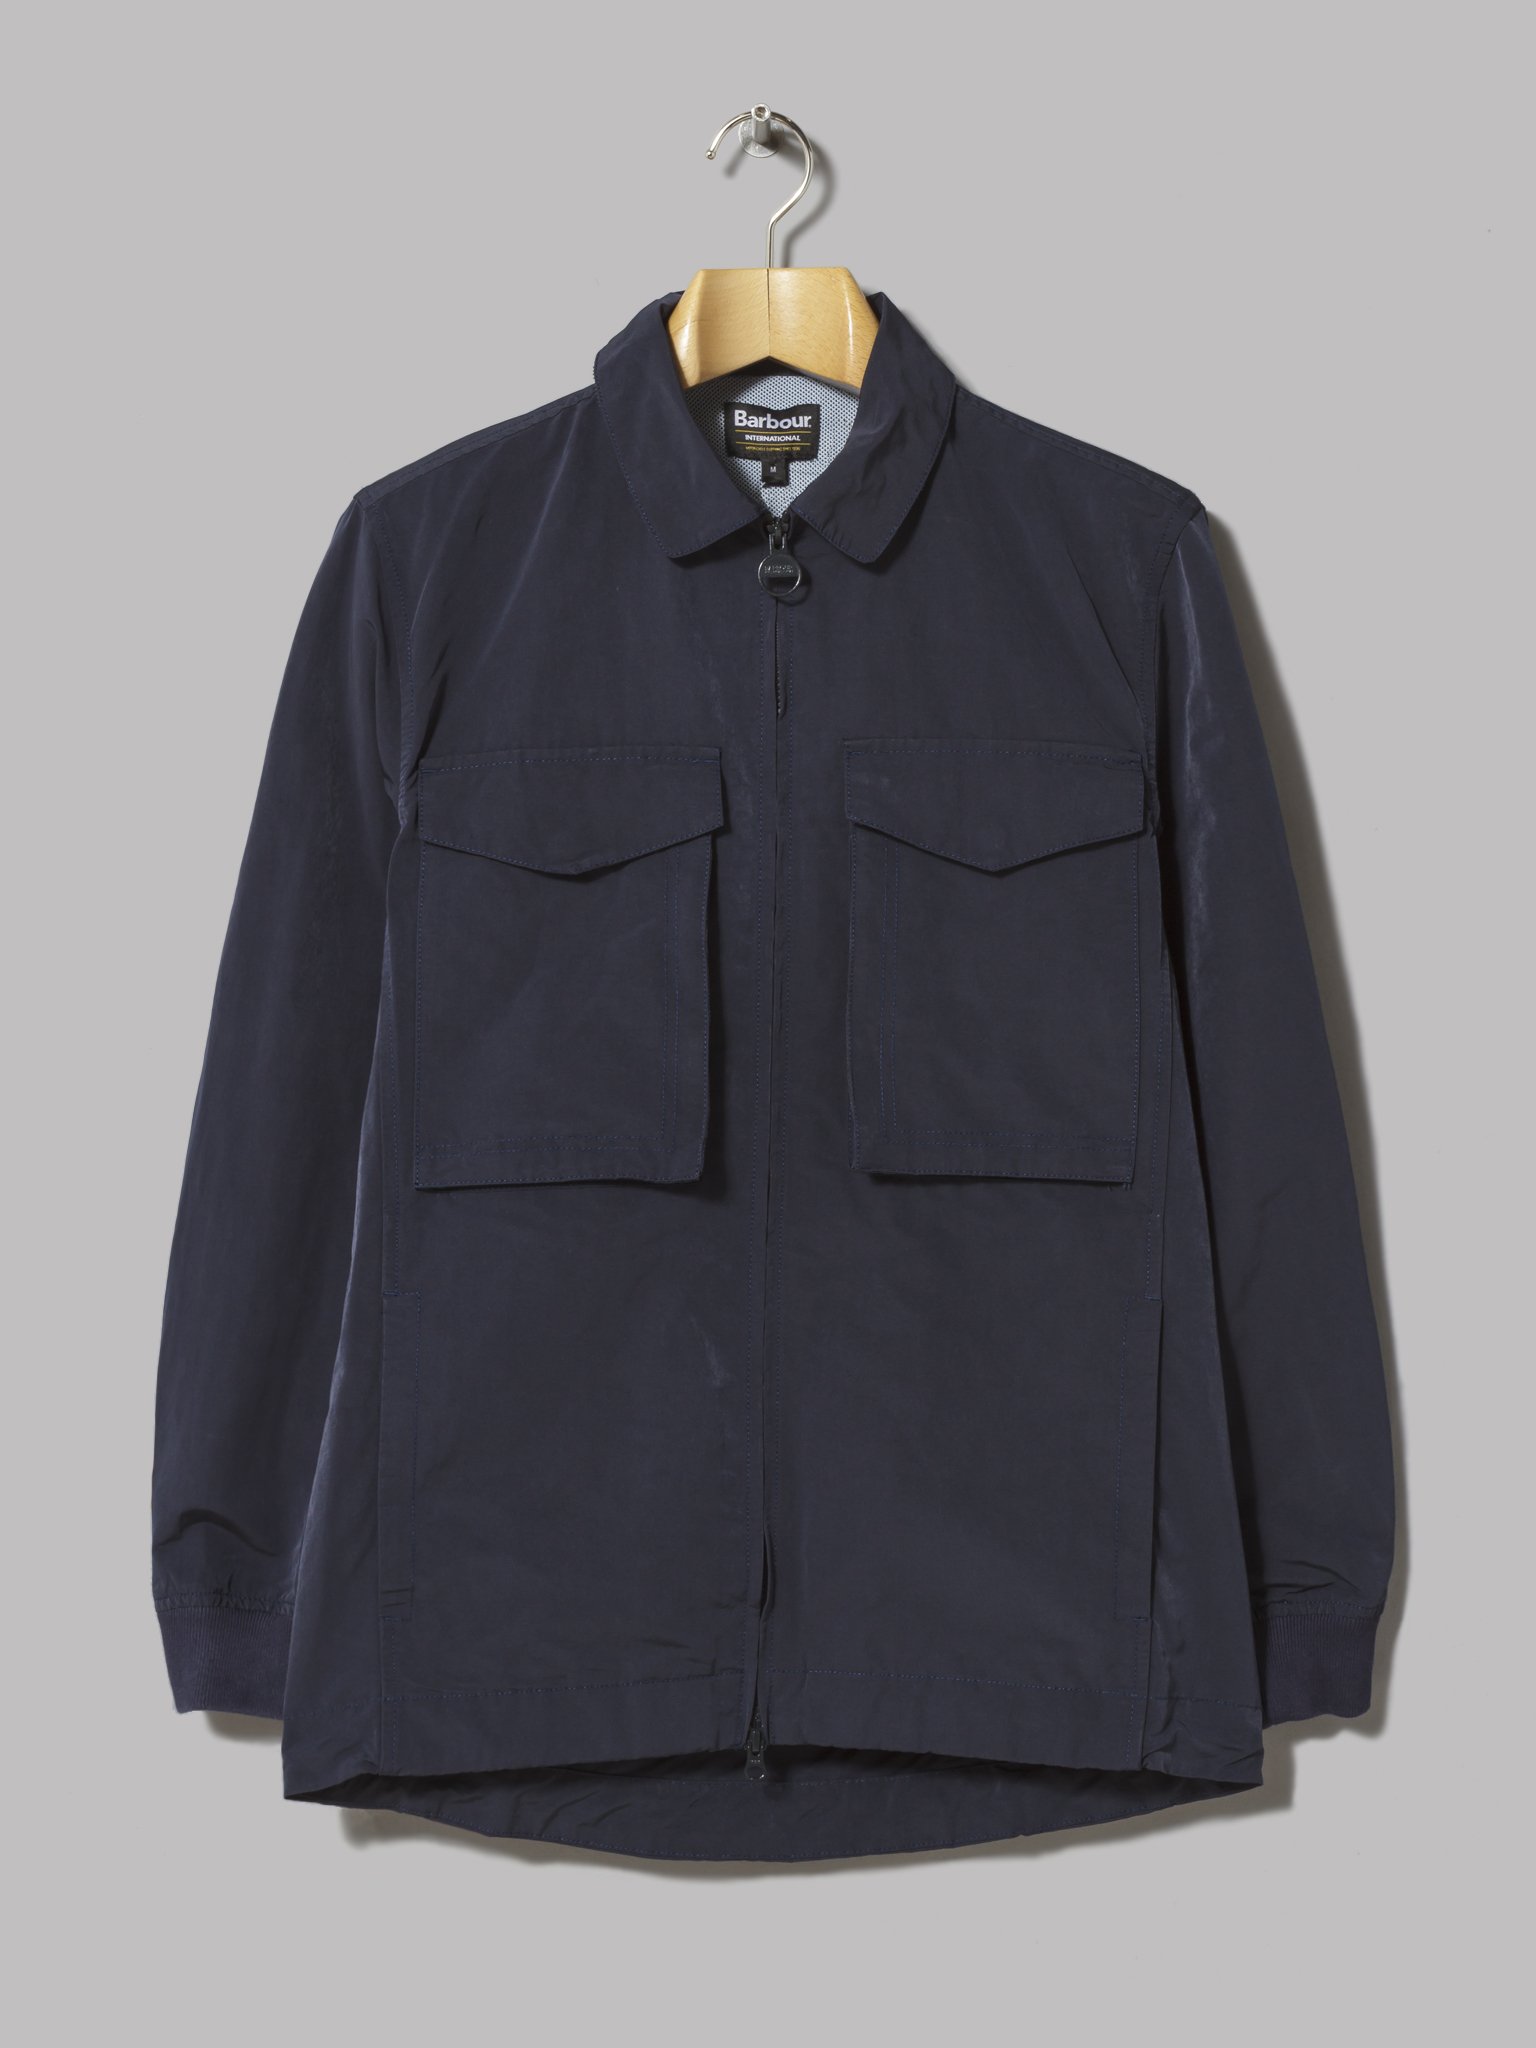 barbour style jacket mens